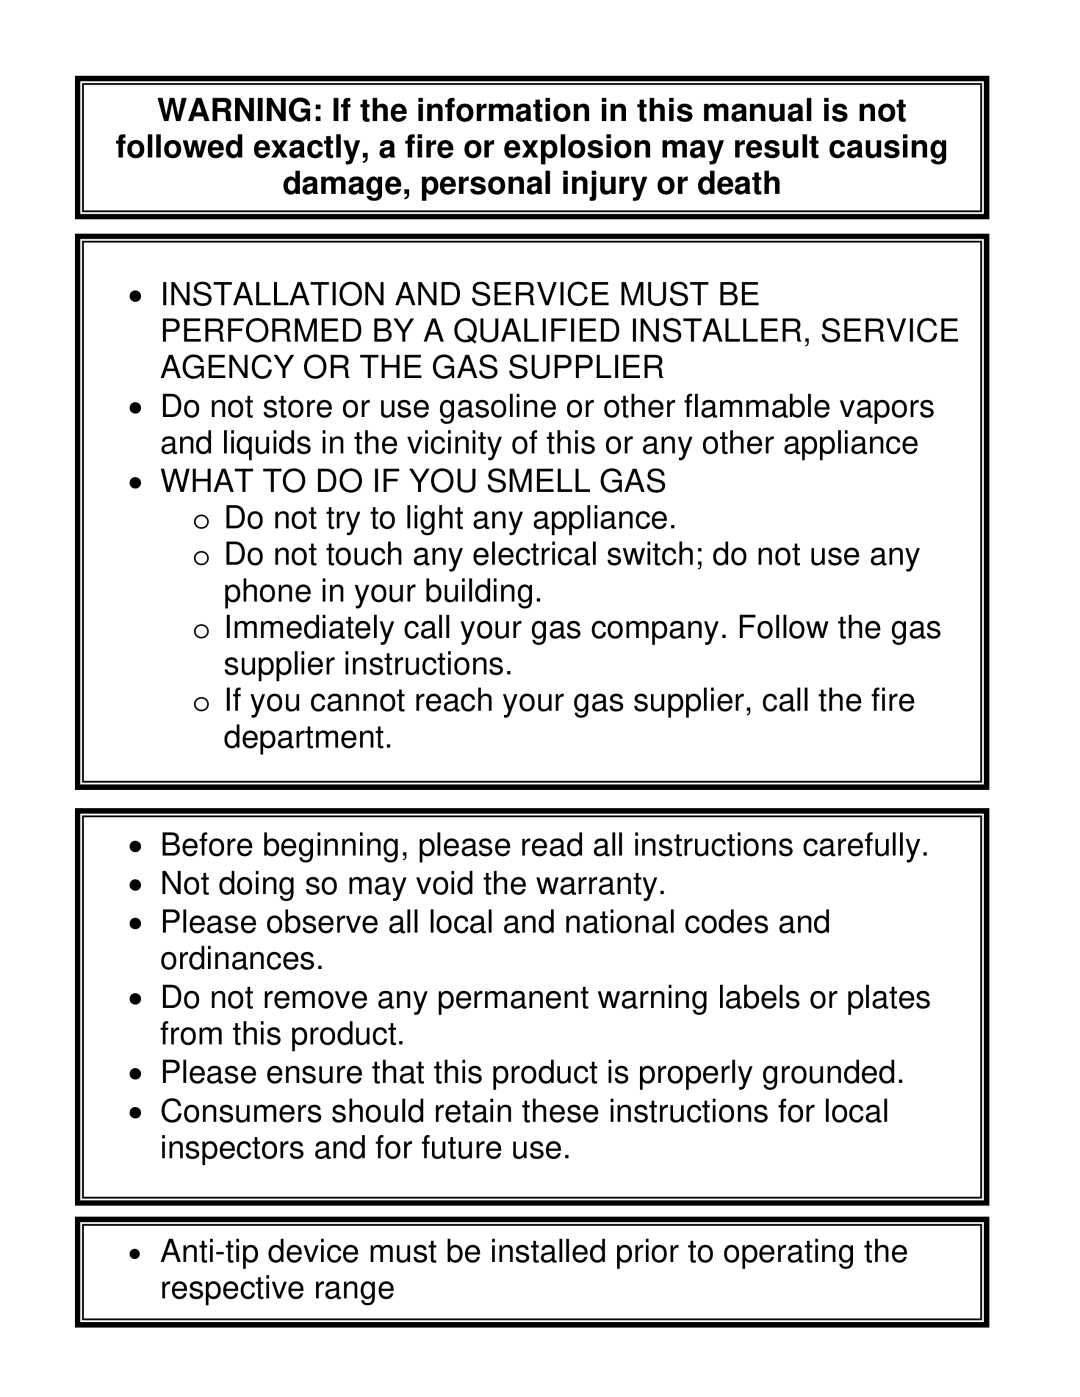 GE ARR-636, ARR-6062GD, ARR-486GD, ARR-GR WARNING If the information in this manual is not, damage, personal injury or death 